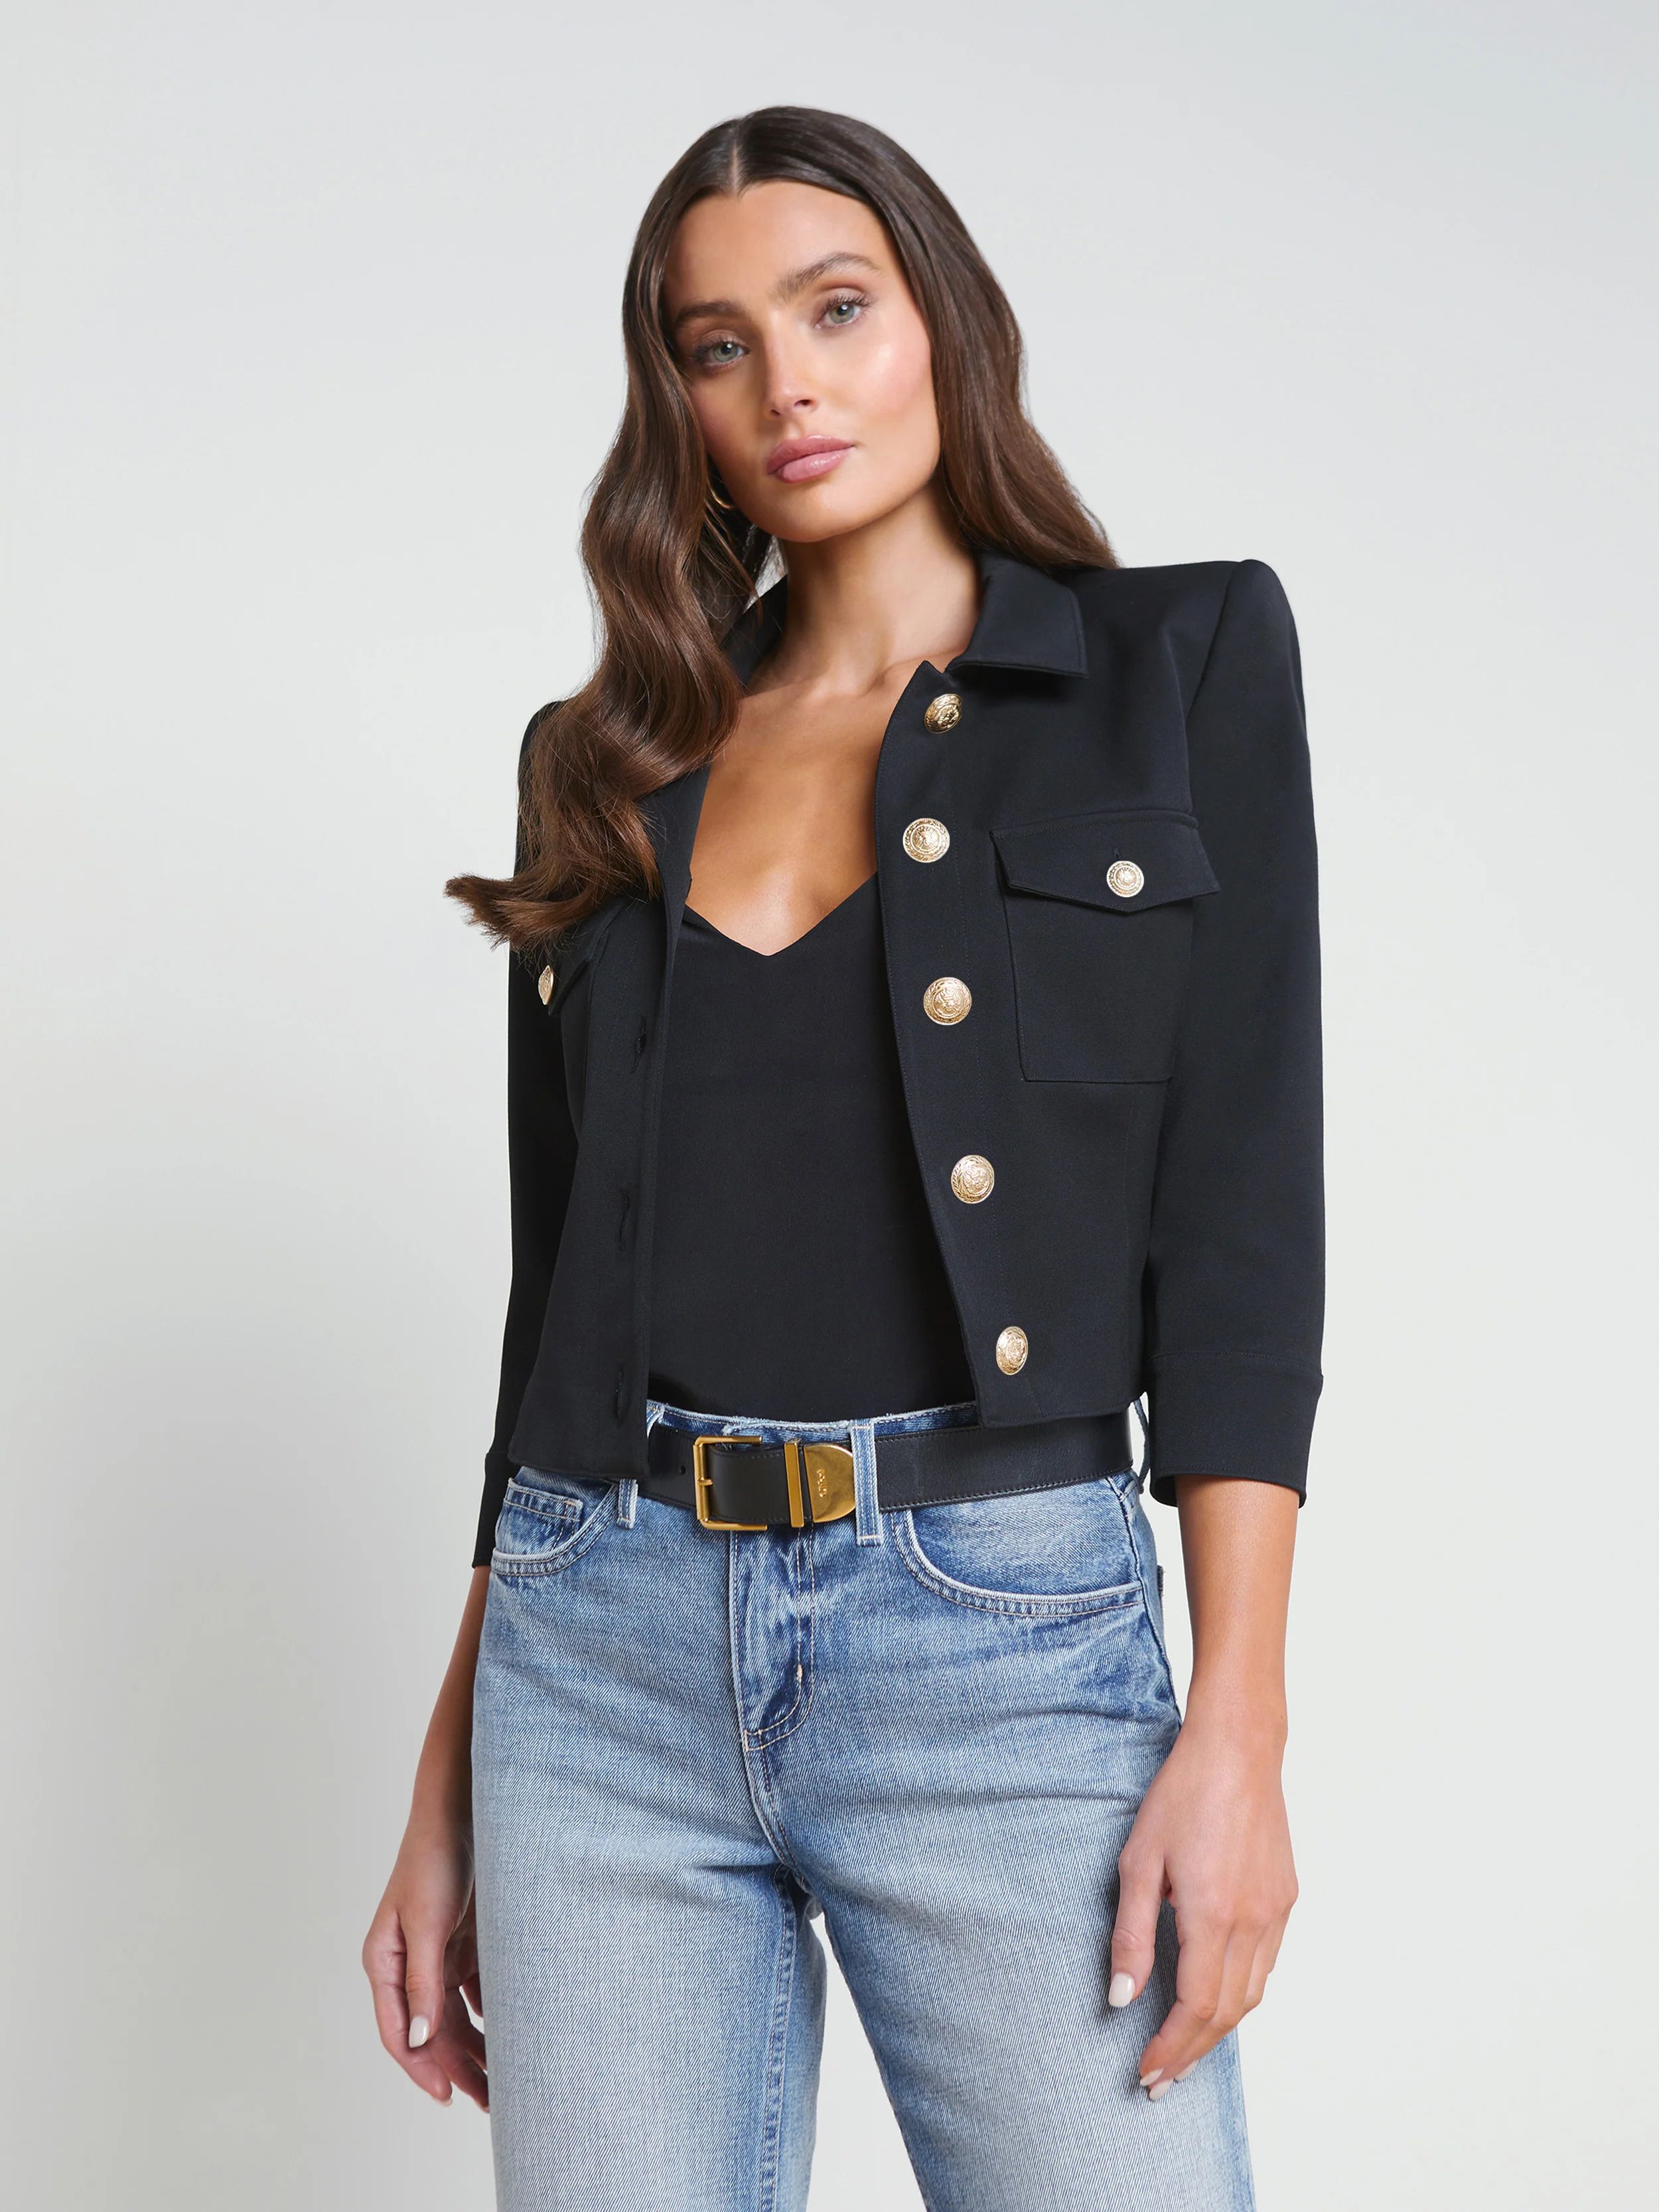 L'AGENCE - Kumi Cropped Jacket in Black | L'Agence